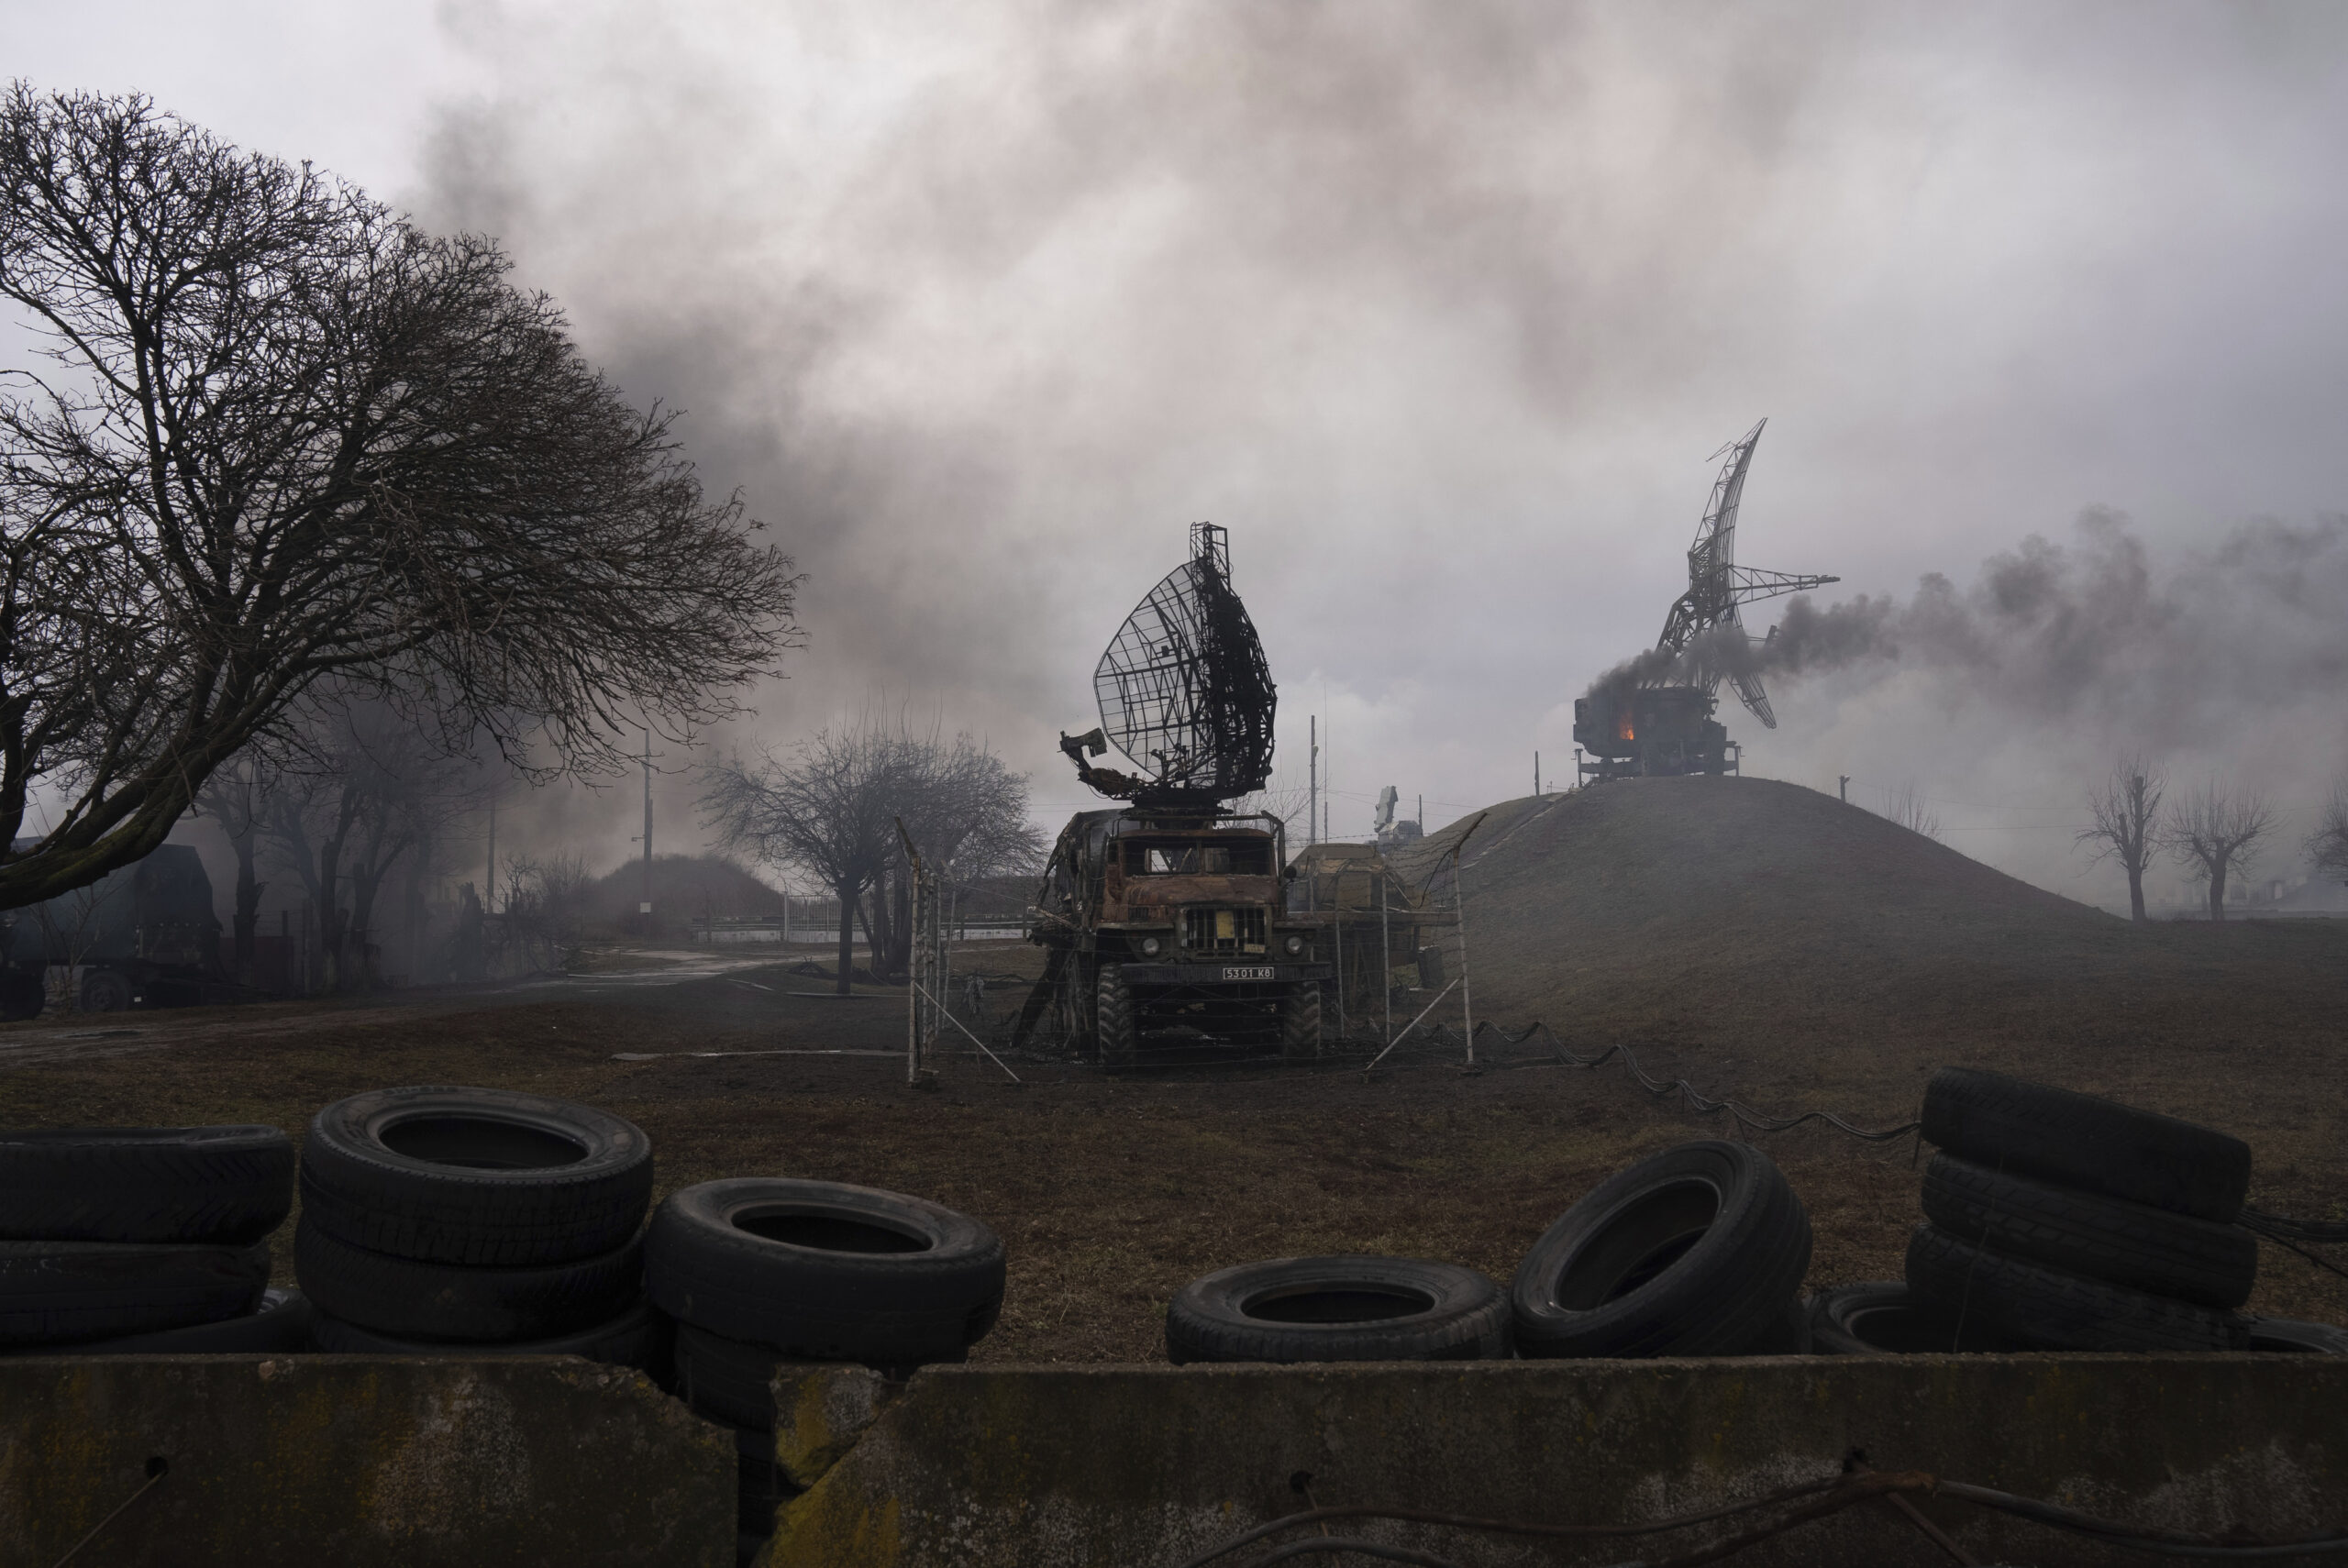 Smoke rises from an air defense base in the aftermath of an apparent Russian strike in Mariupol, Ukraine